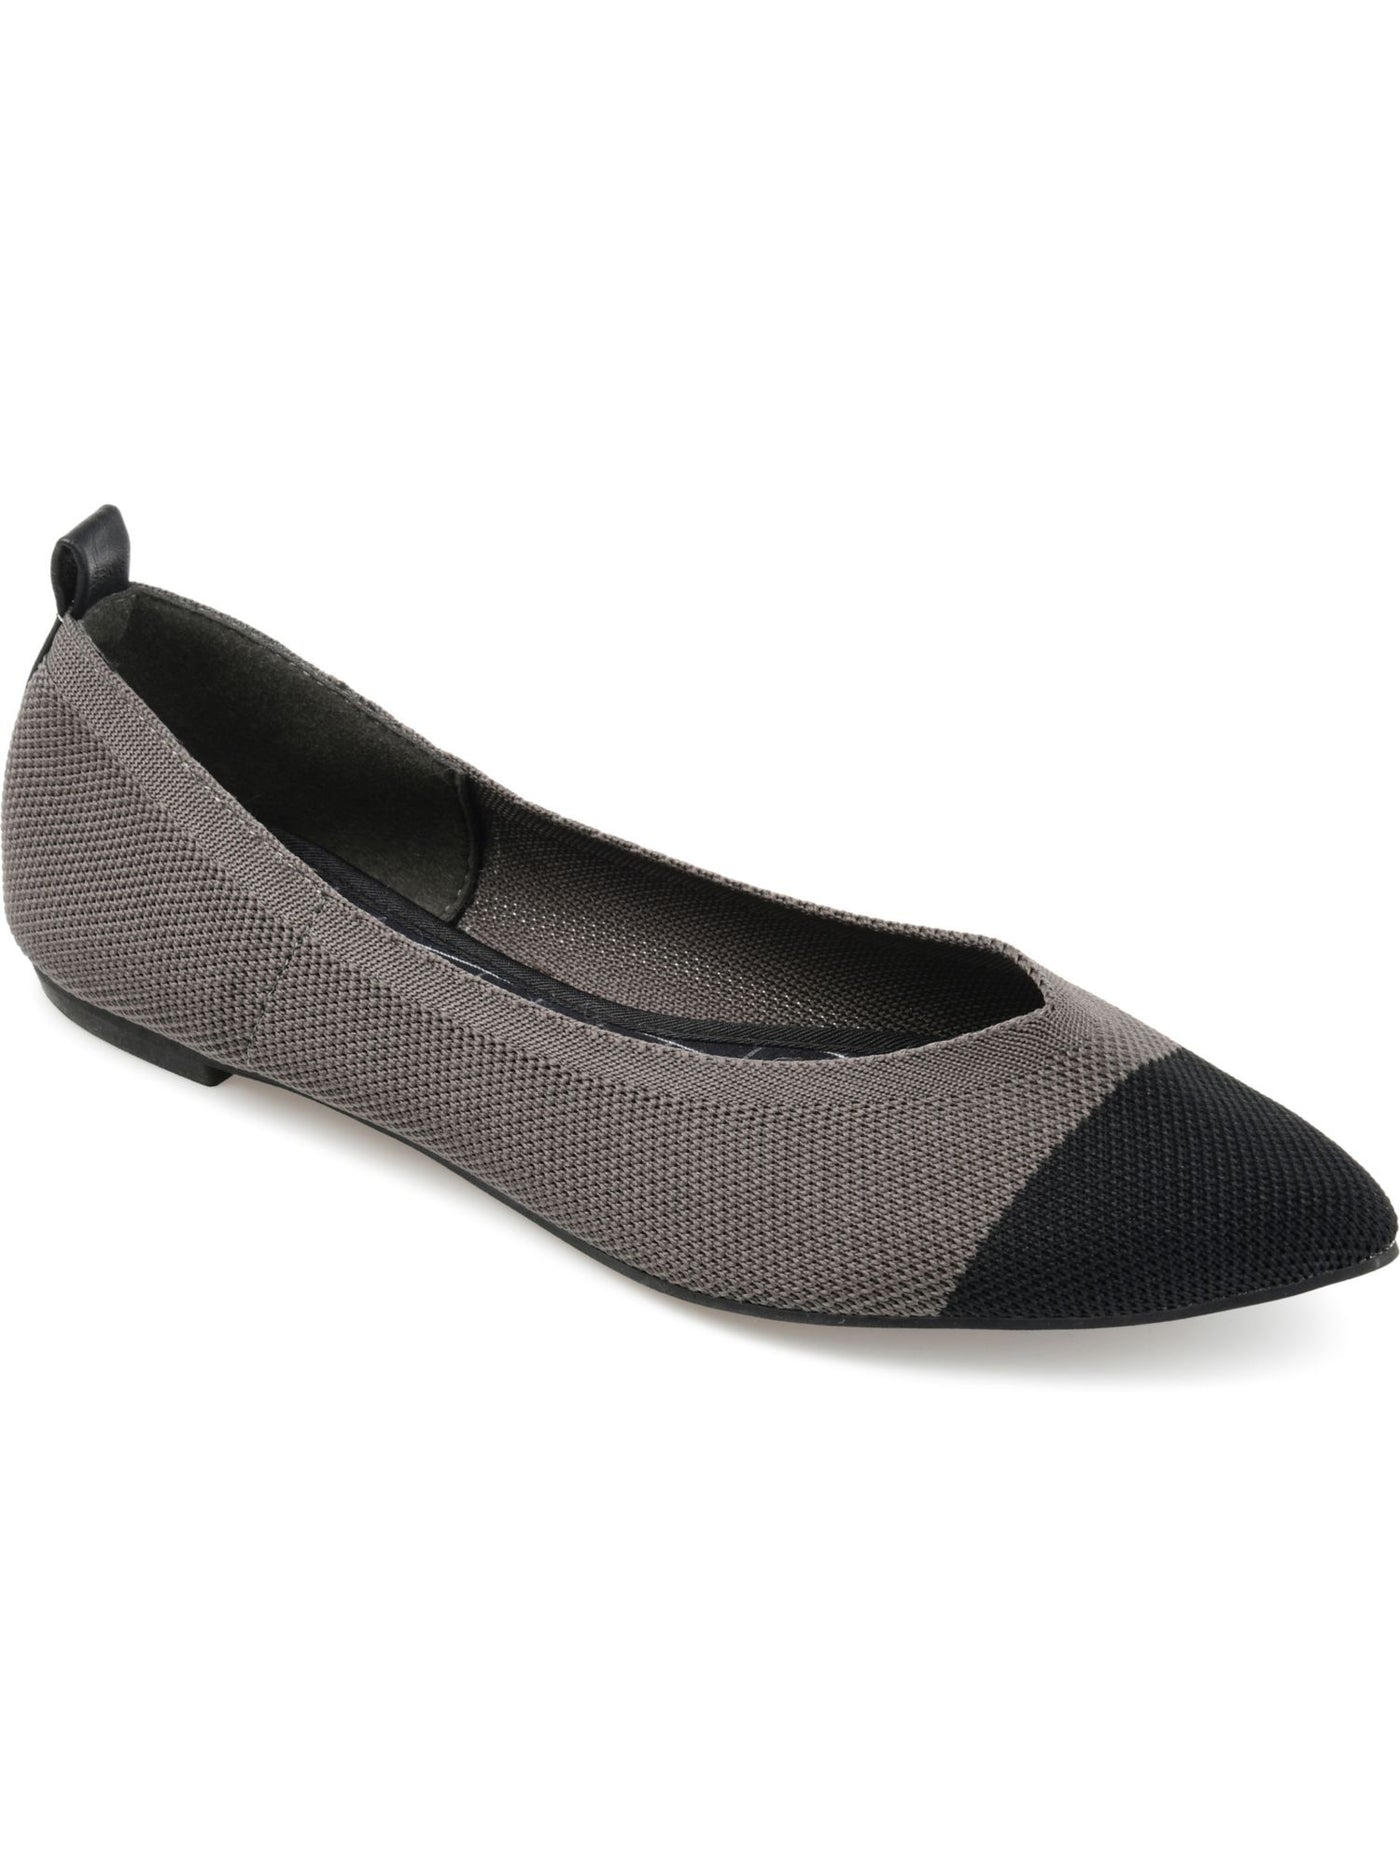 JOURNEE COLLECTION Womens Grey Gray Patterned Comfort Stretch Veata Pointed Toe Slip On Ballet Flats 8.5